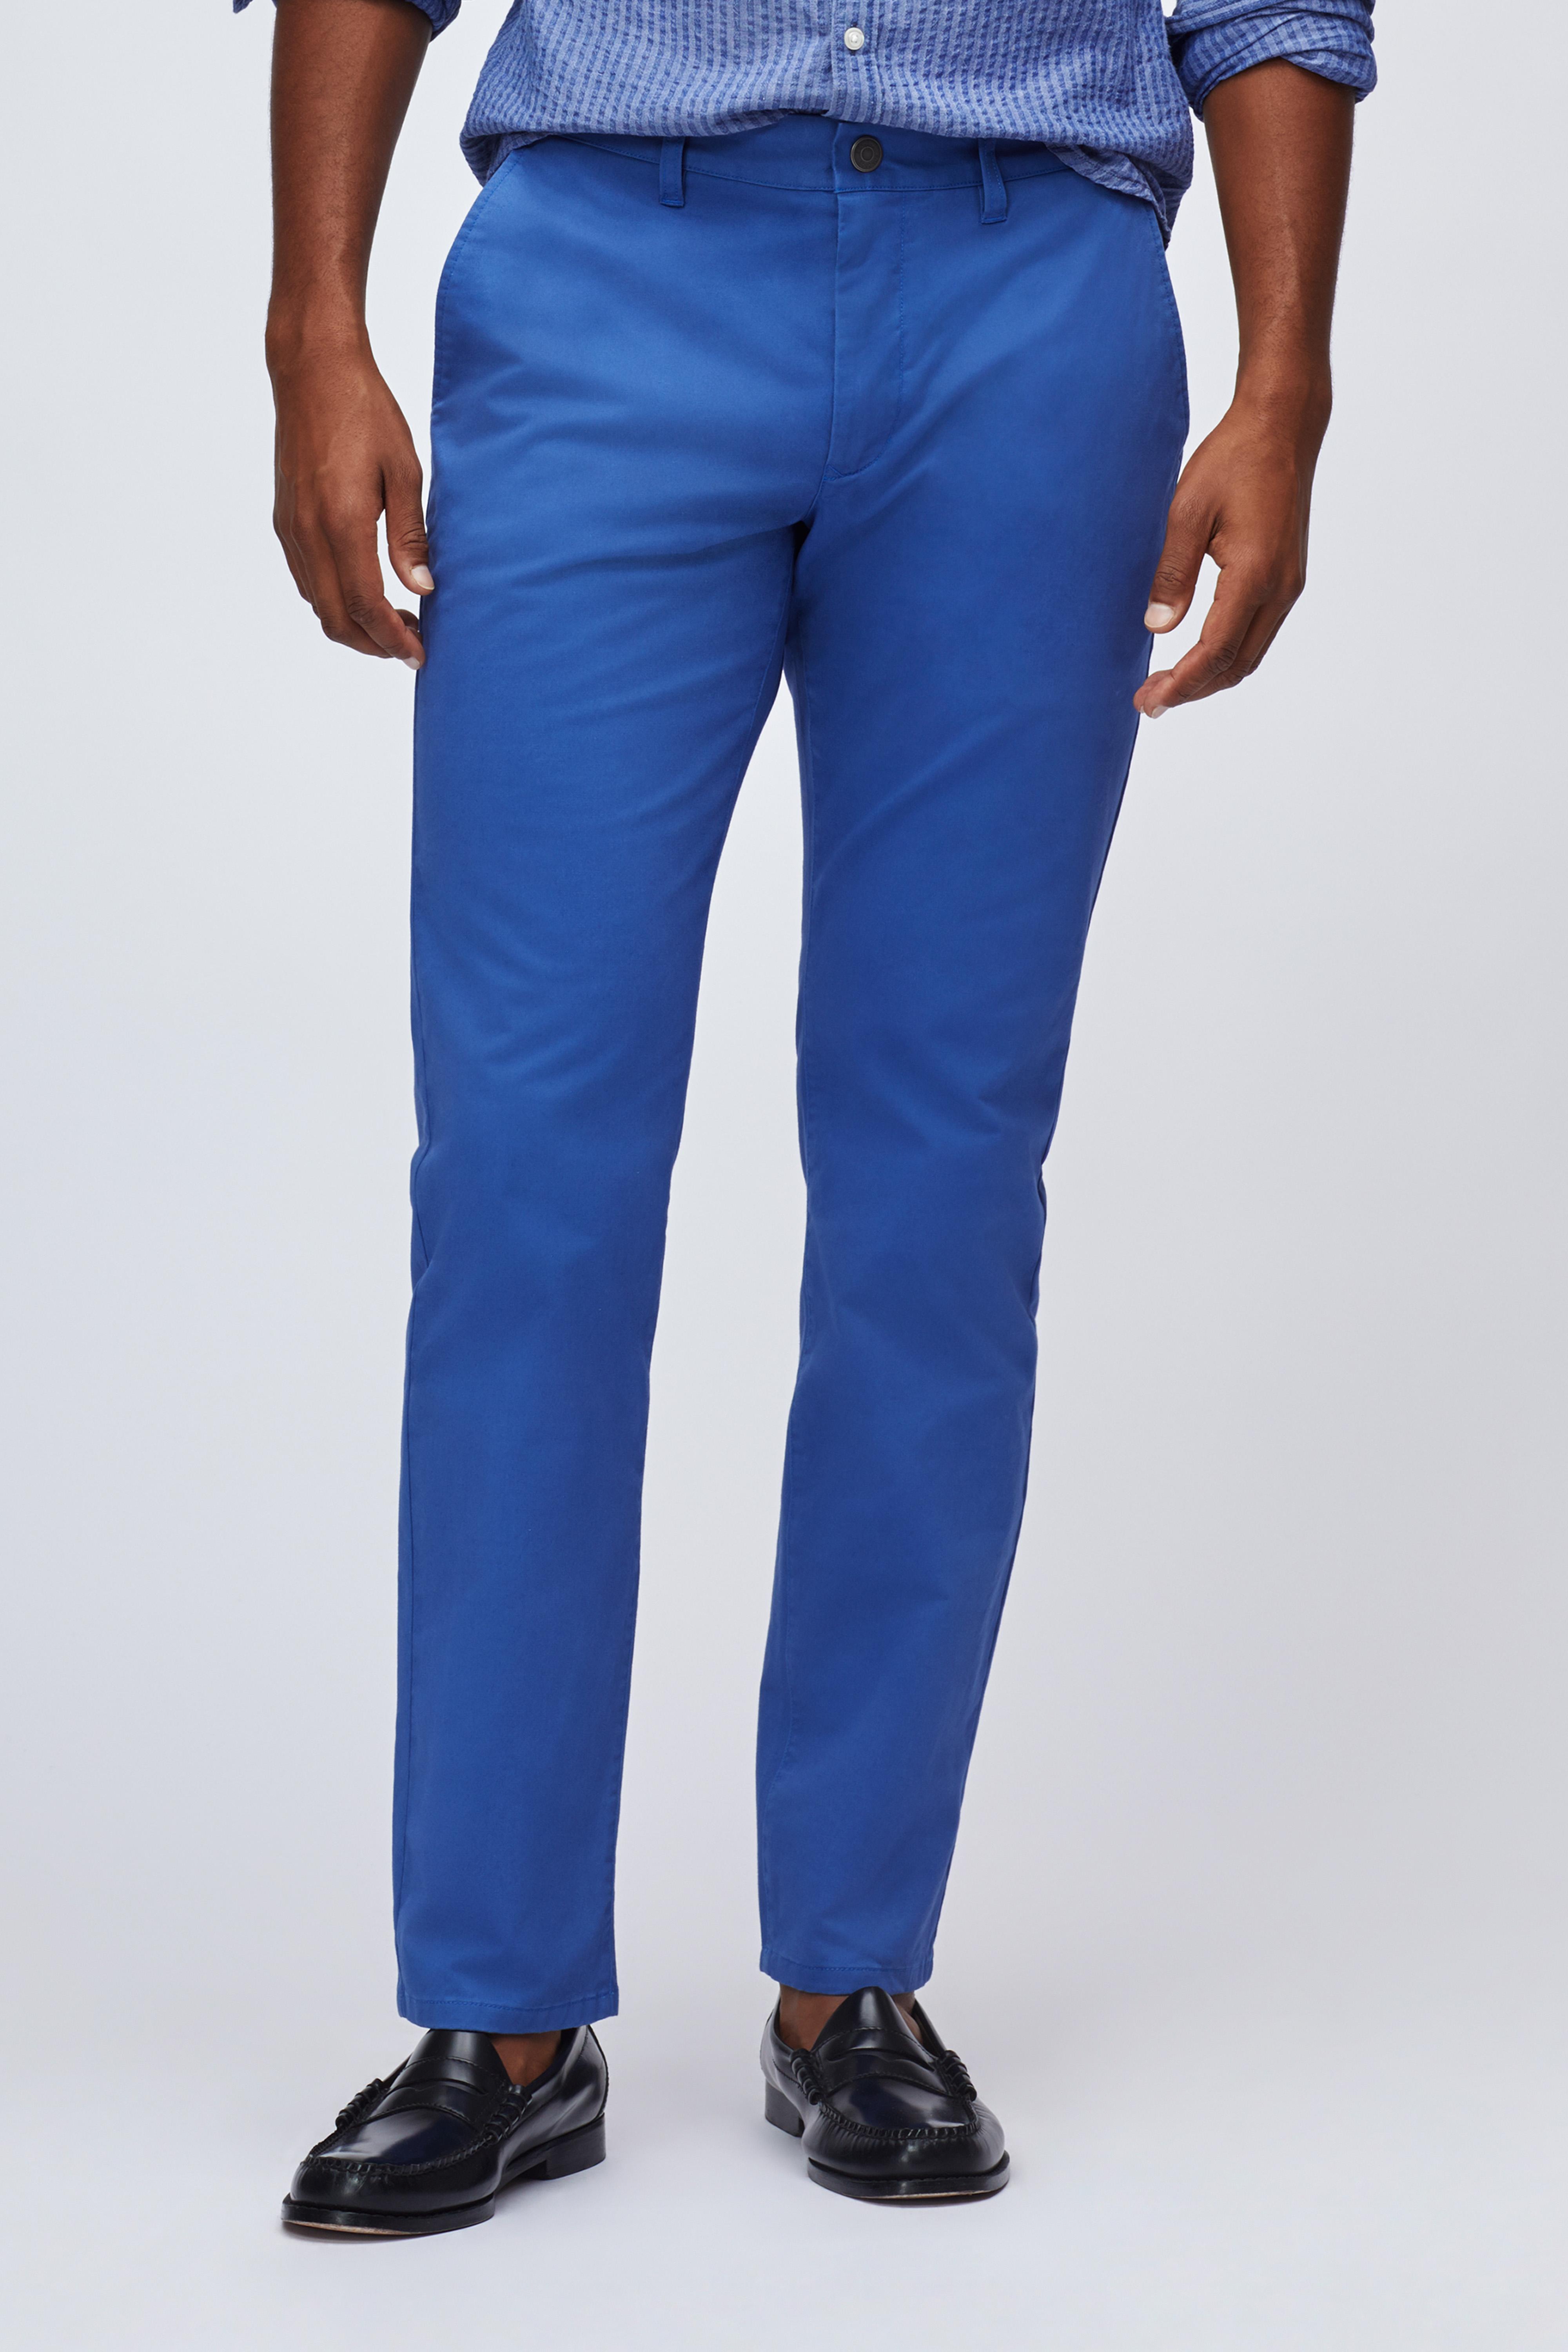 Bonobos Cotton Stretch Washed Chinos in Blue for Men - Lyst